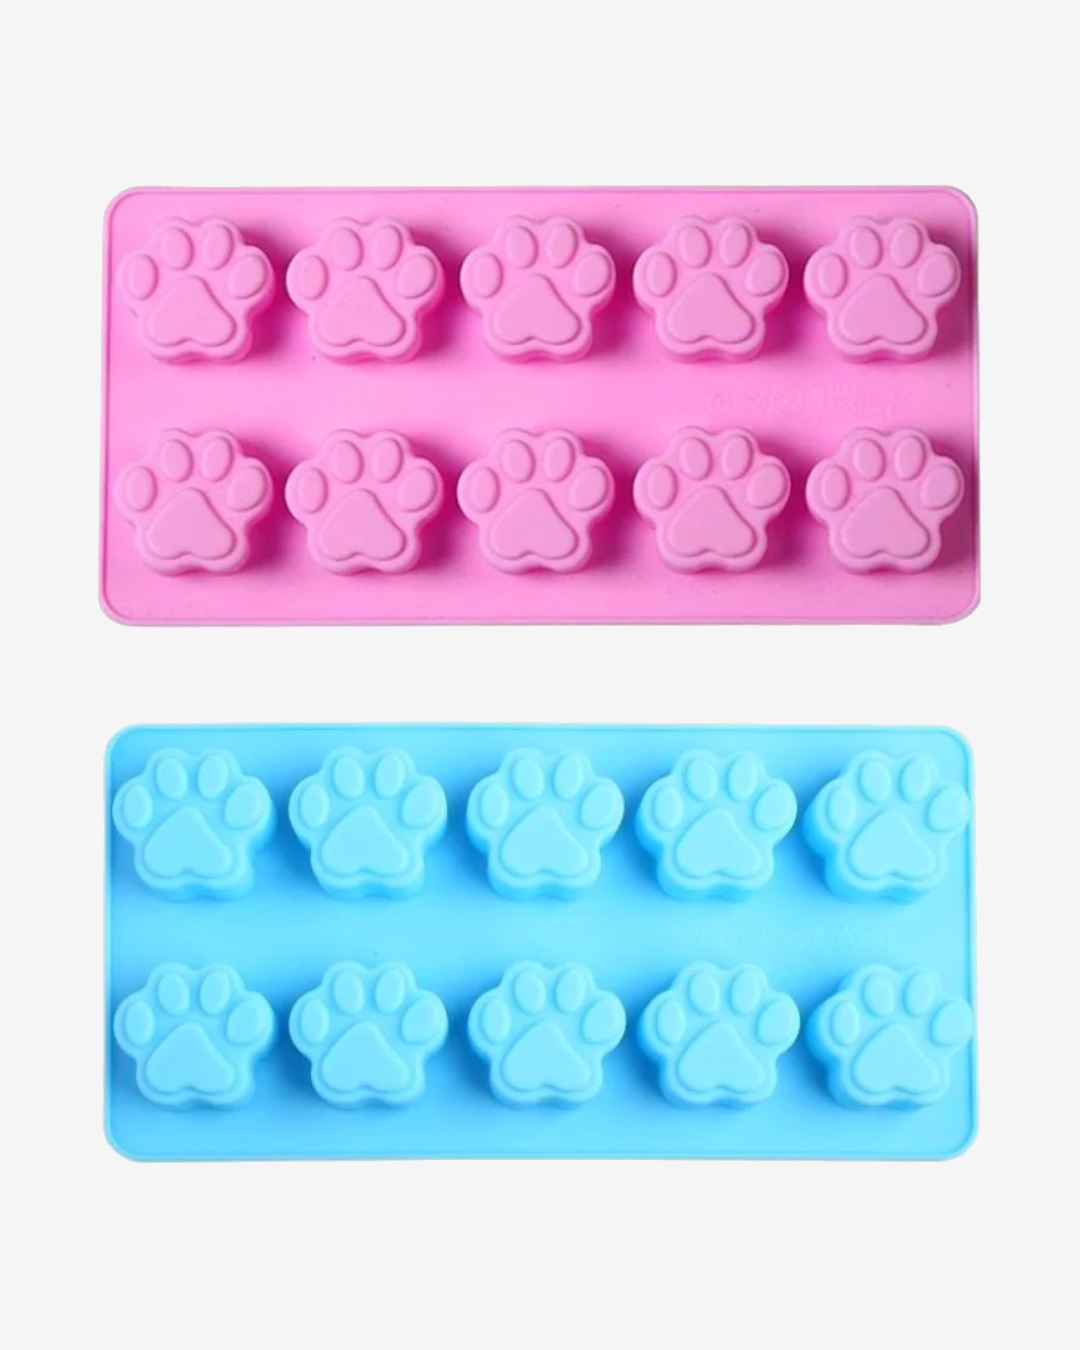 Pink and blue paw moulds